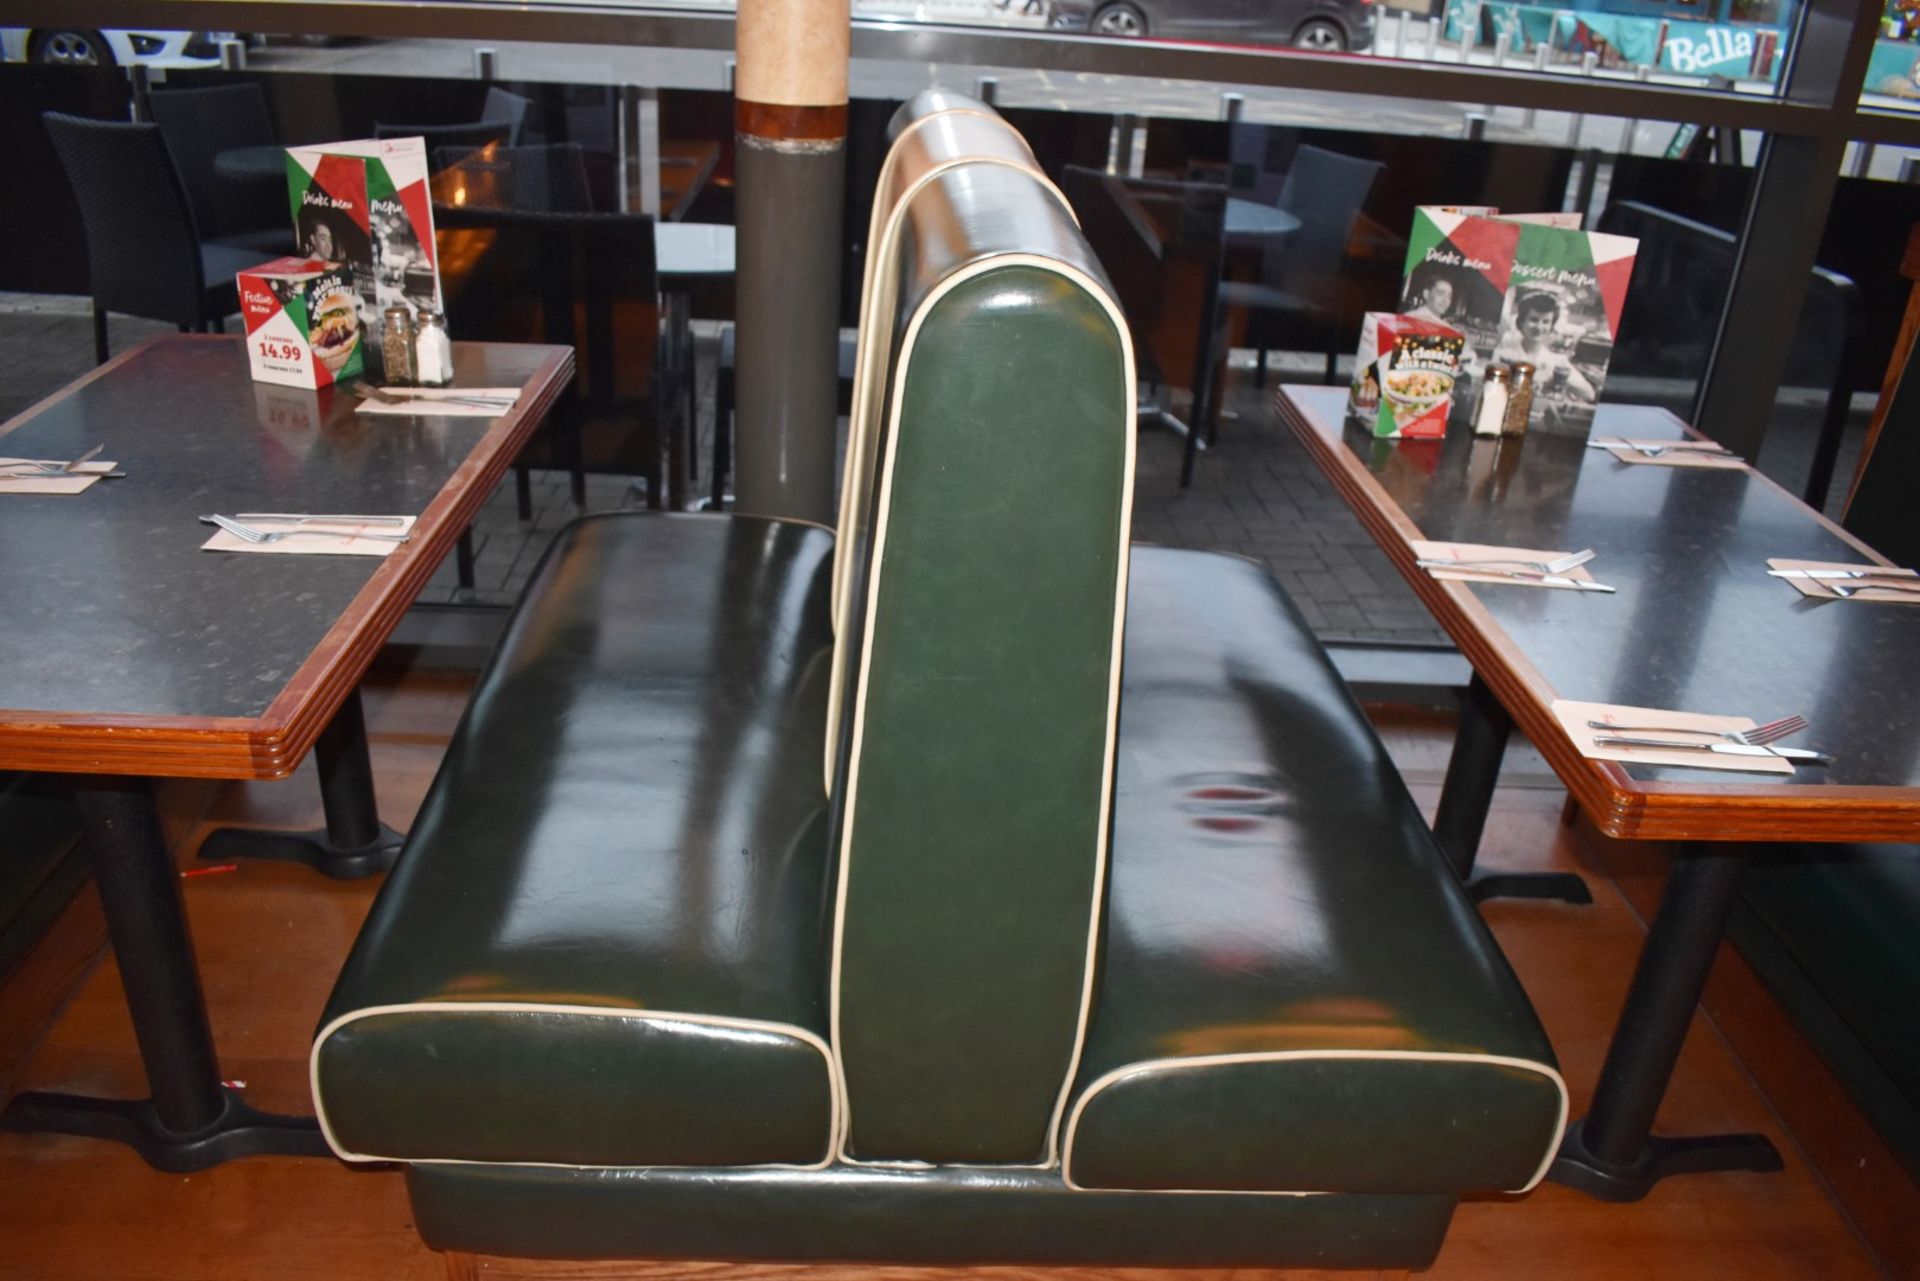 3 x Sections of Booth Seating - Upholstered in a Green and Cream Retro Style Faux Leather Upholstery - Image 4 of 6